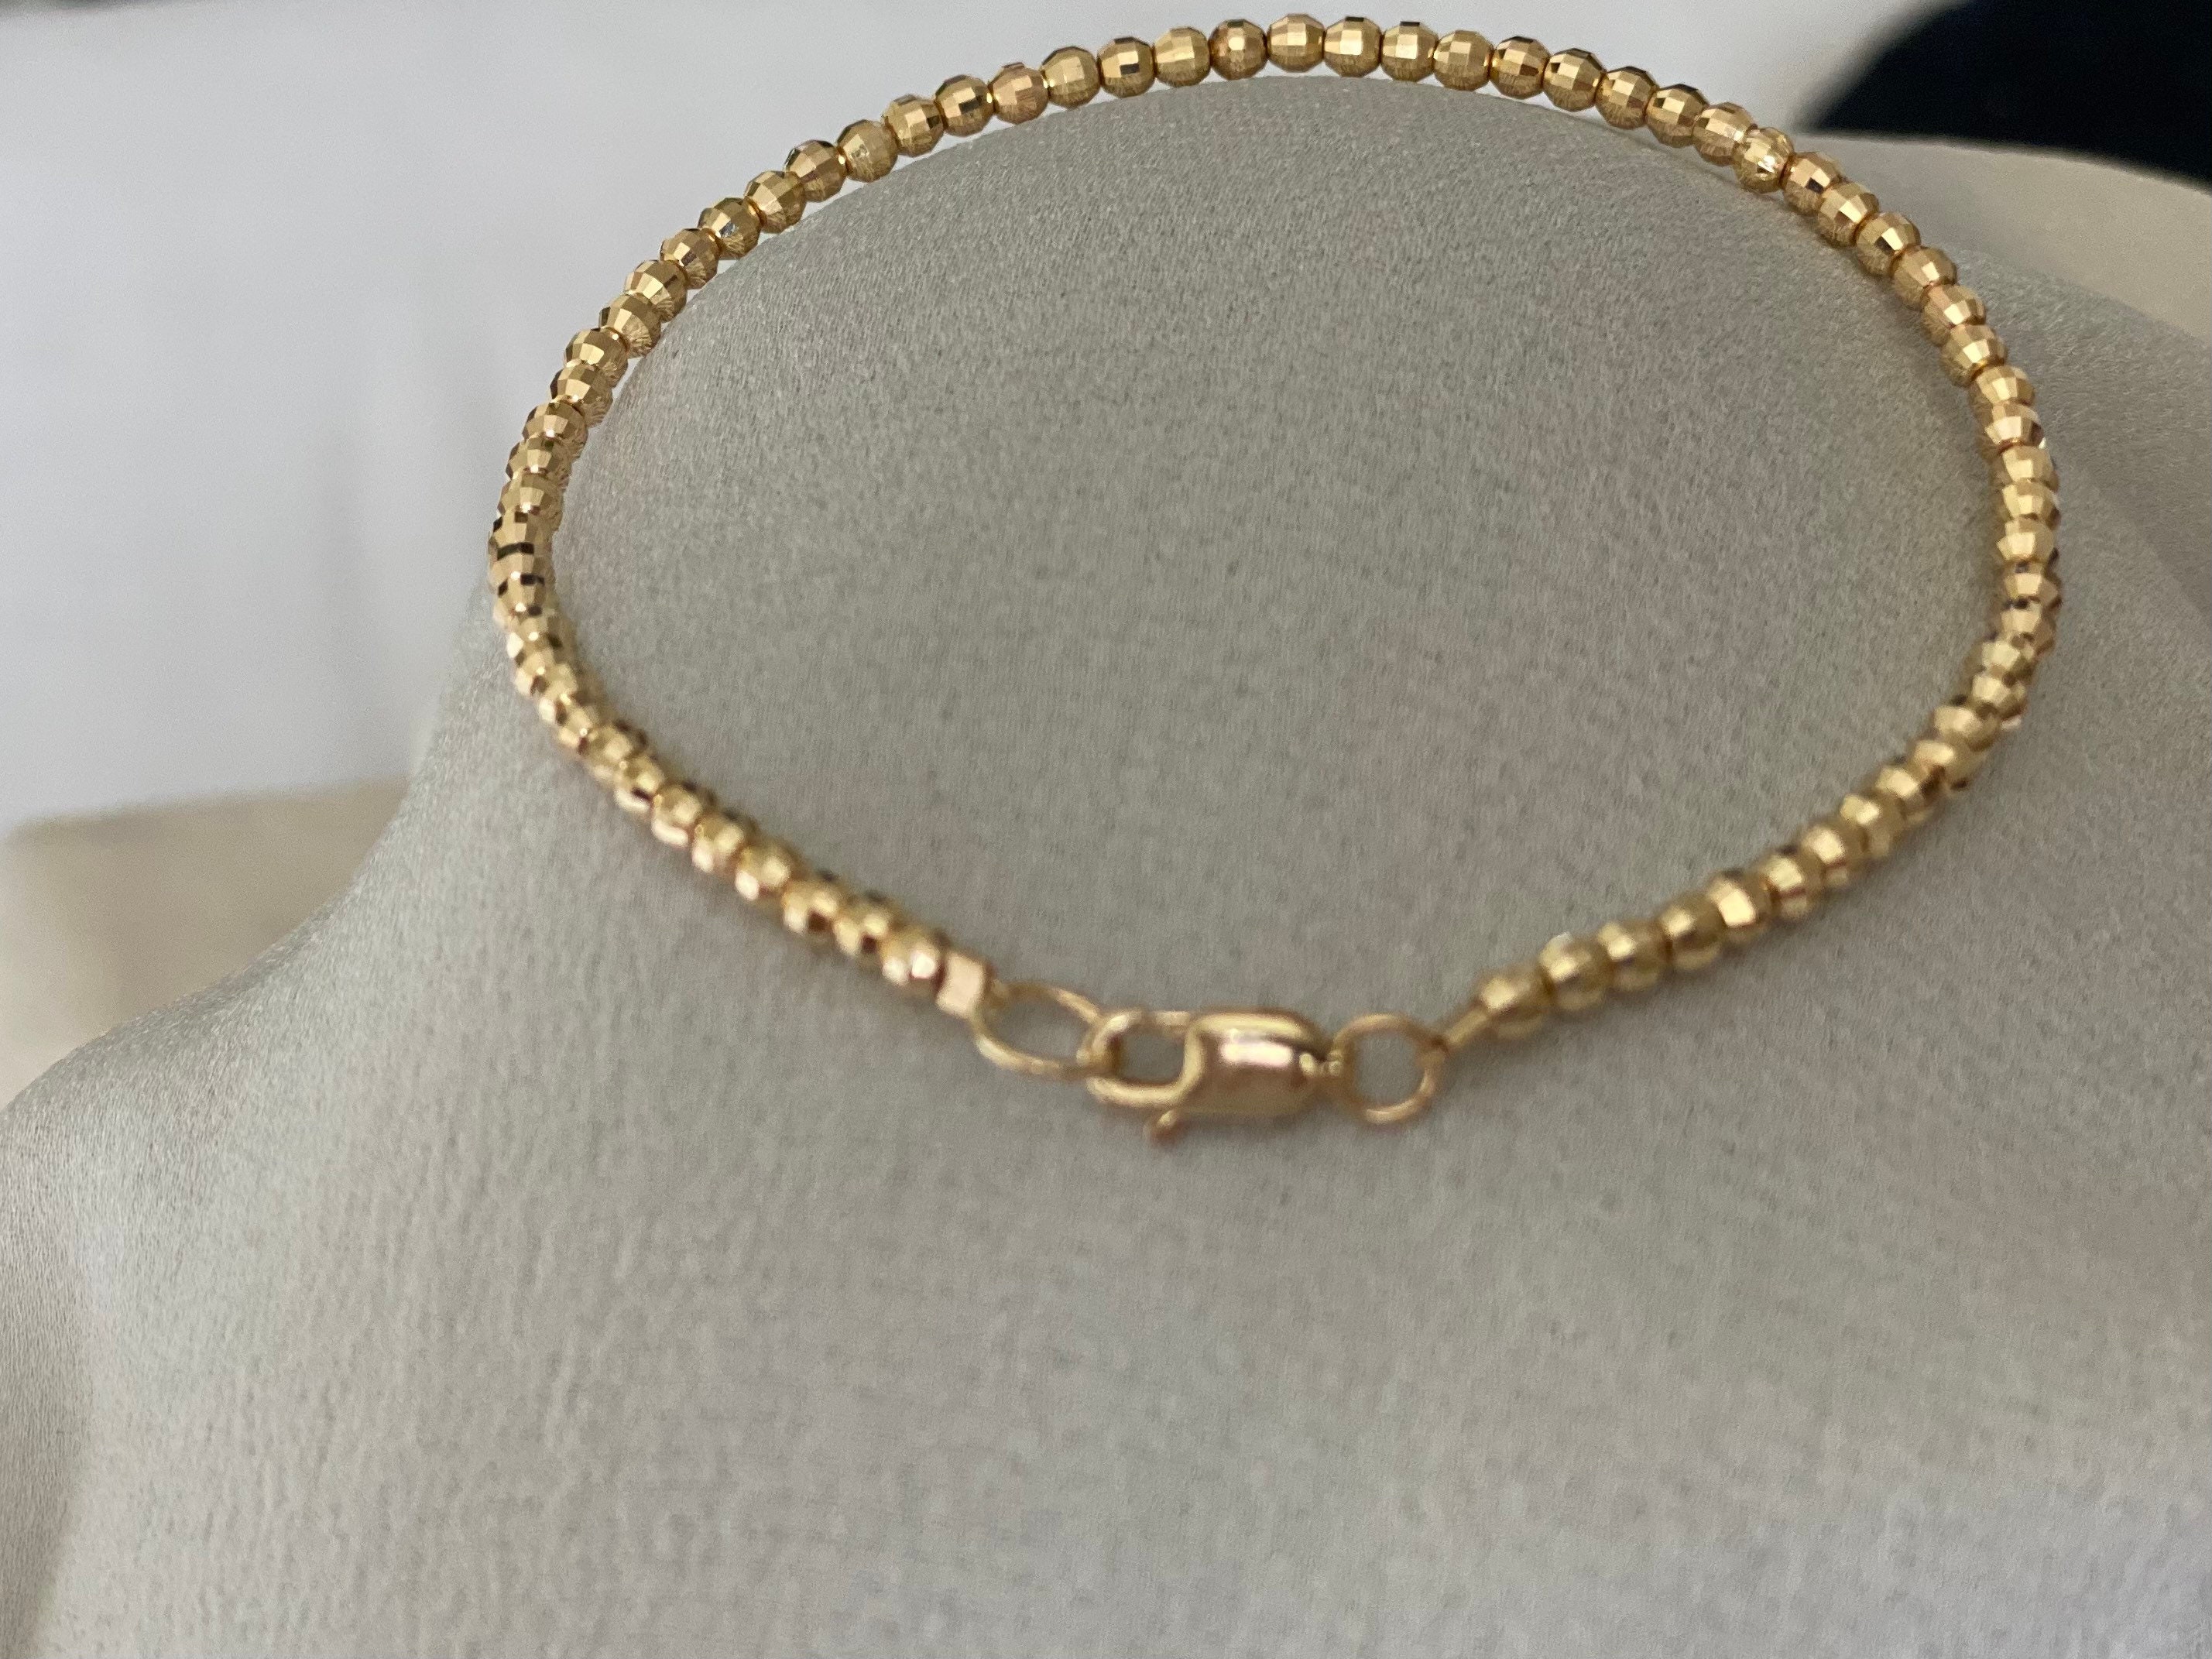 Solid Gold Beads Bracelet. 14k Yellow Gold. Stackable | Etsy